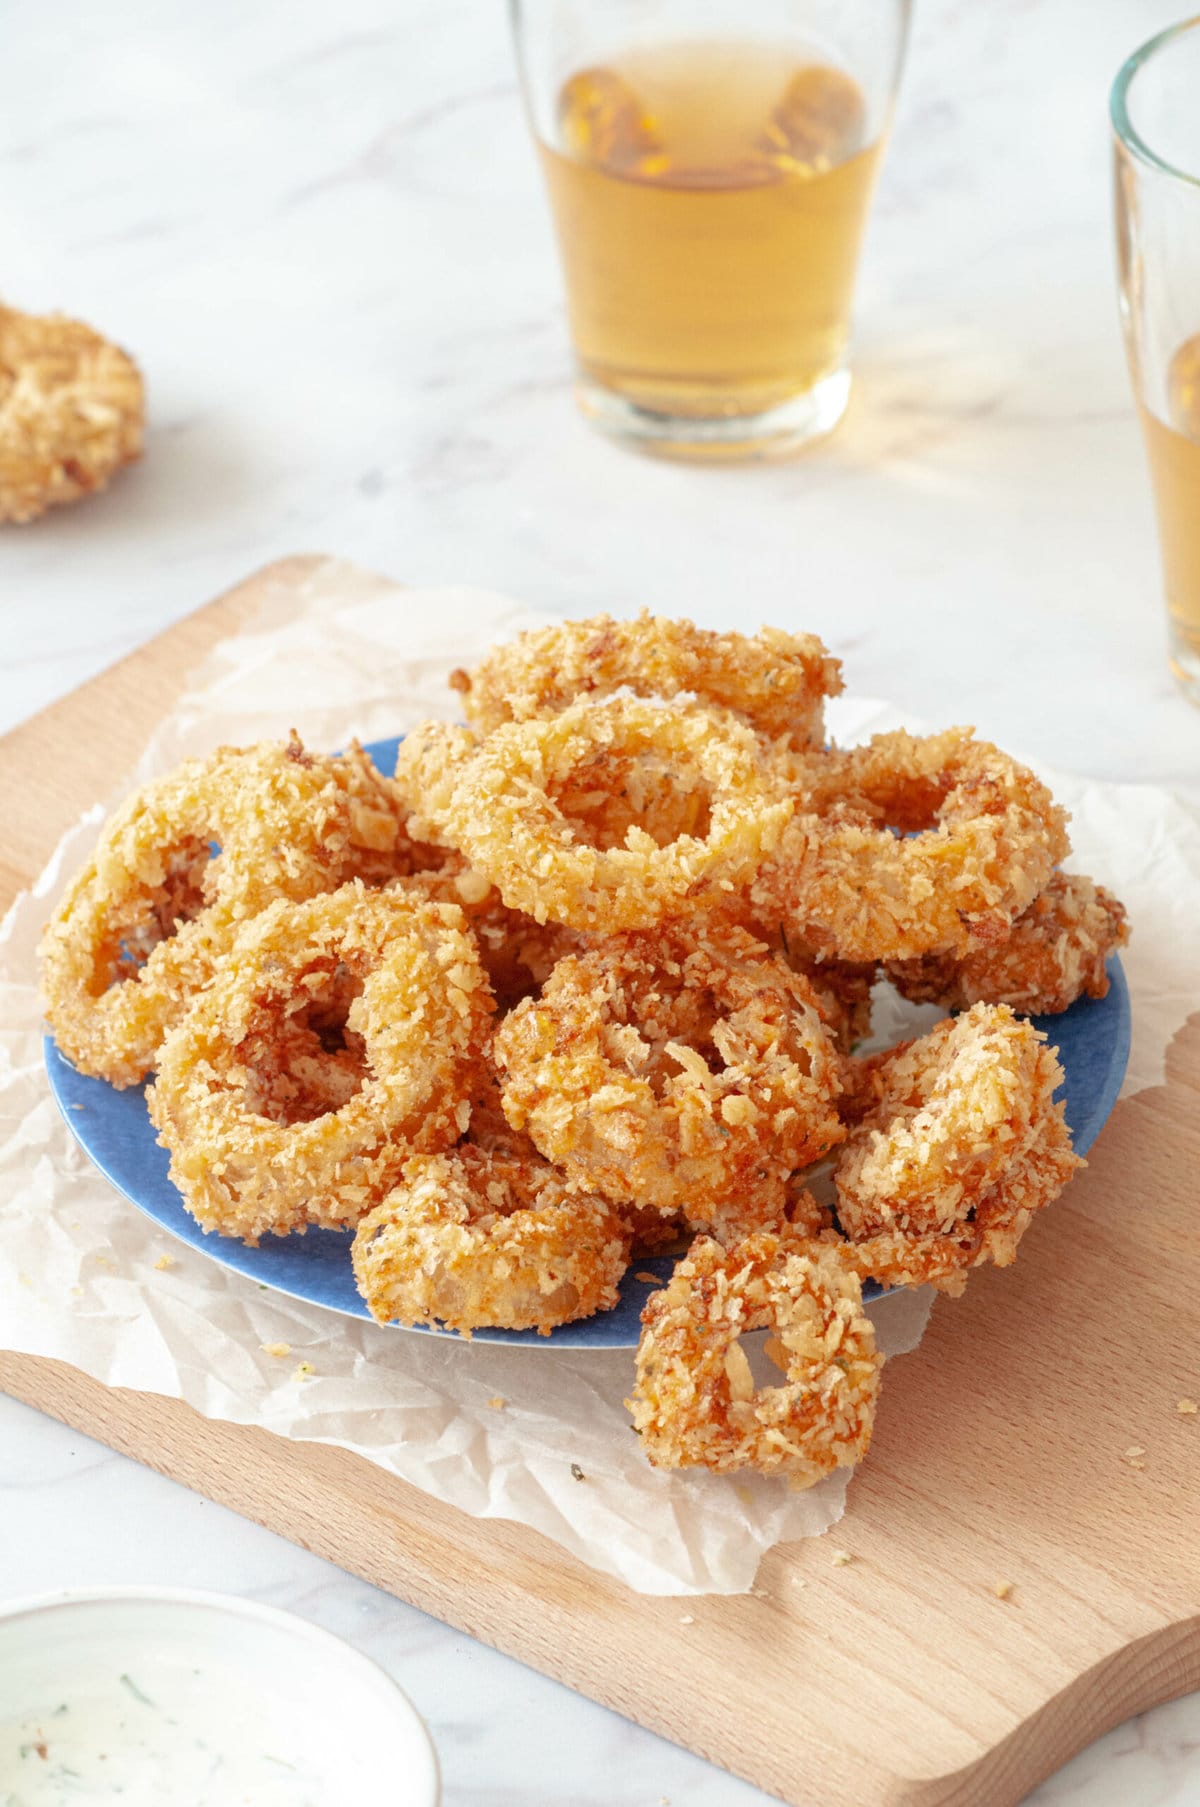 Onion rings on a blue plate placed on parchment paper with two glasses of beer.